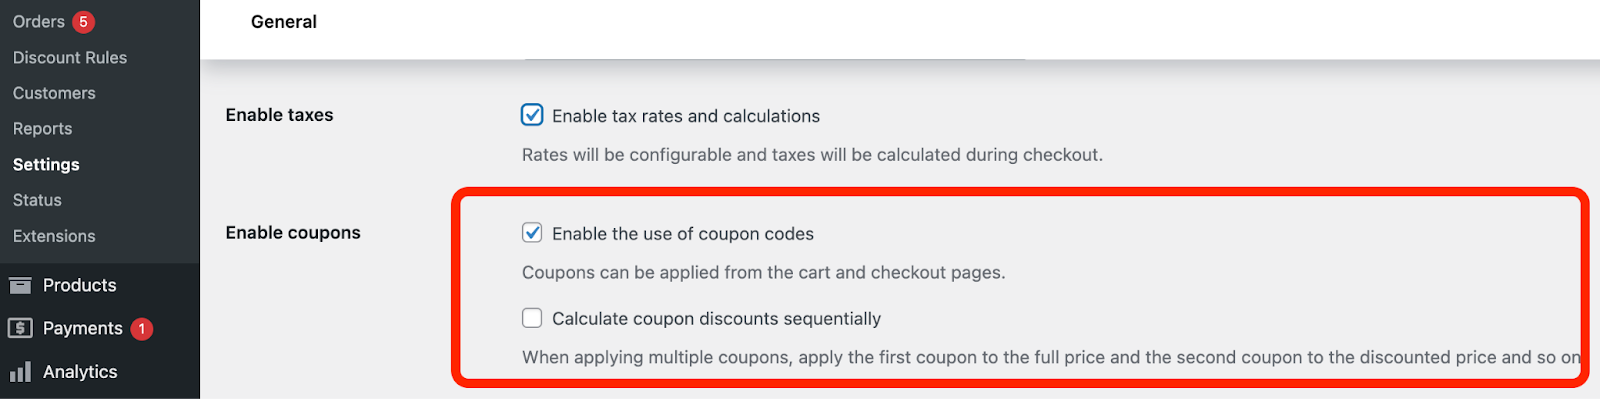 Enable the use of coupon codes